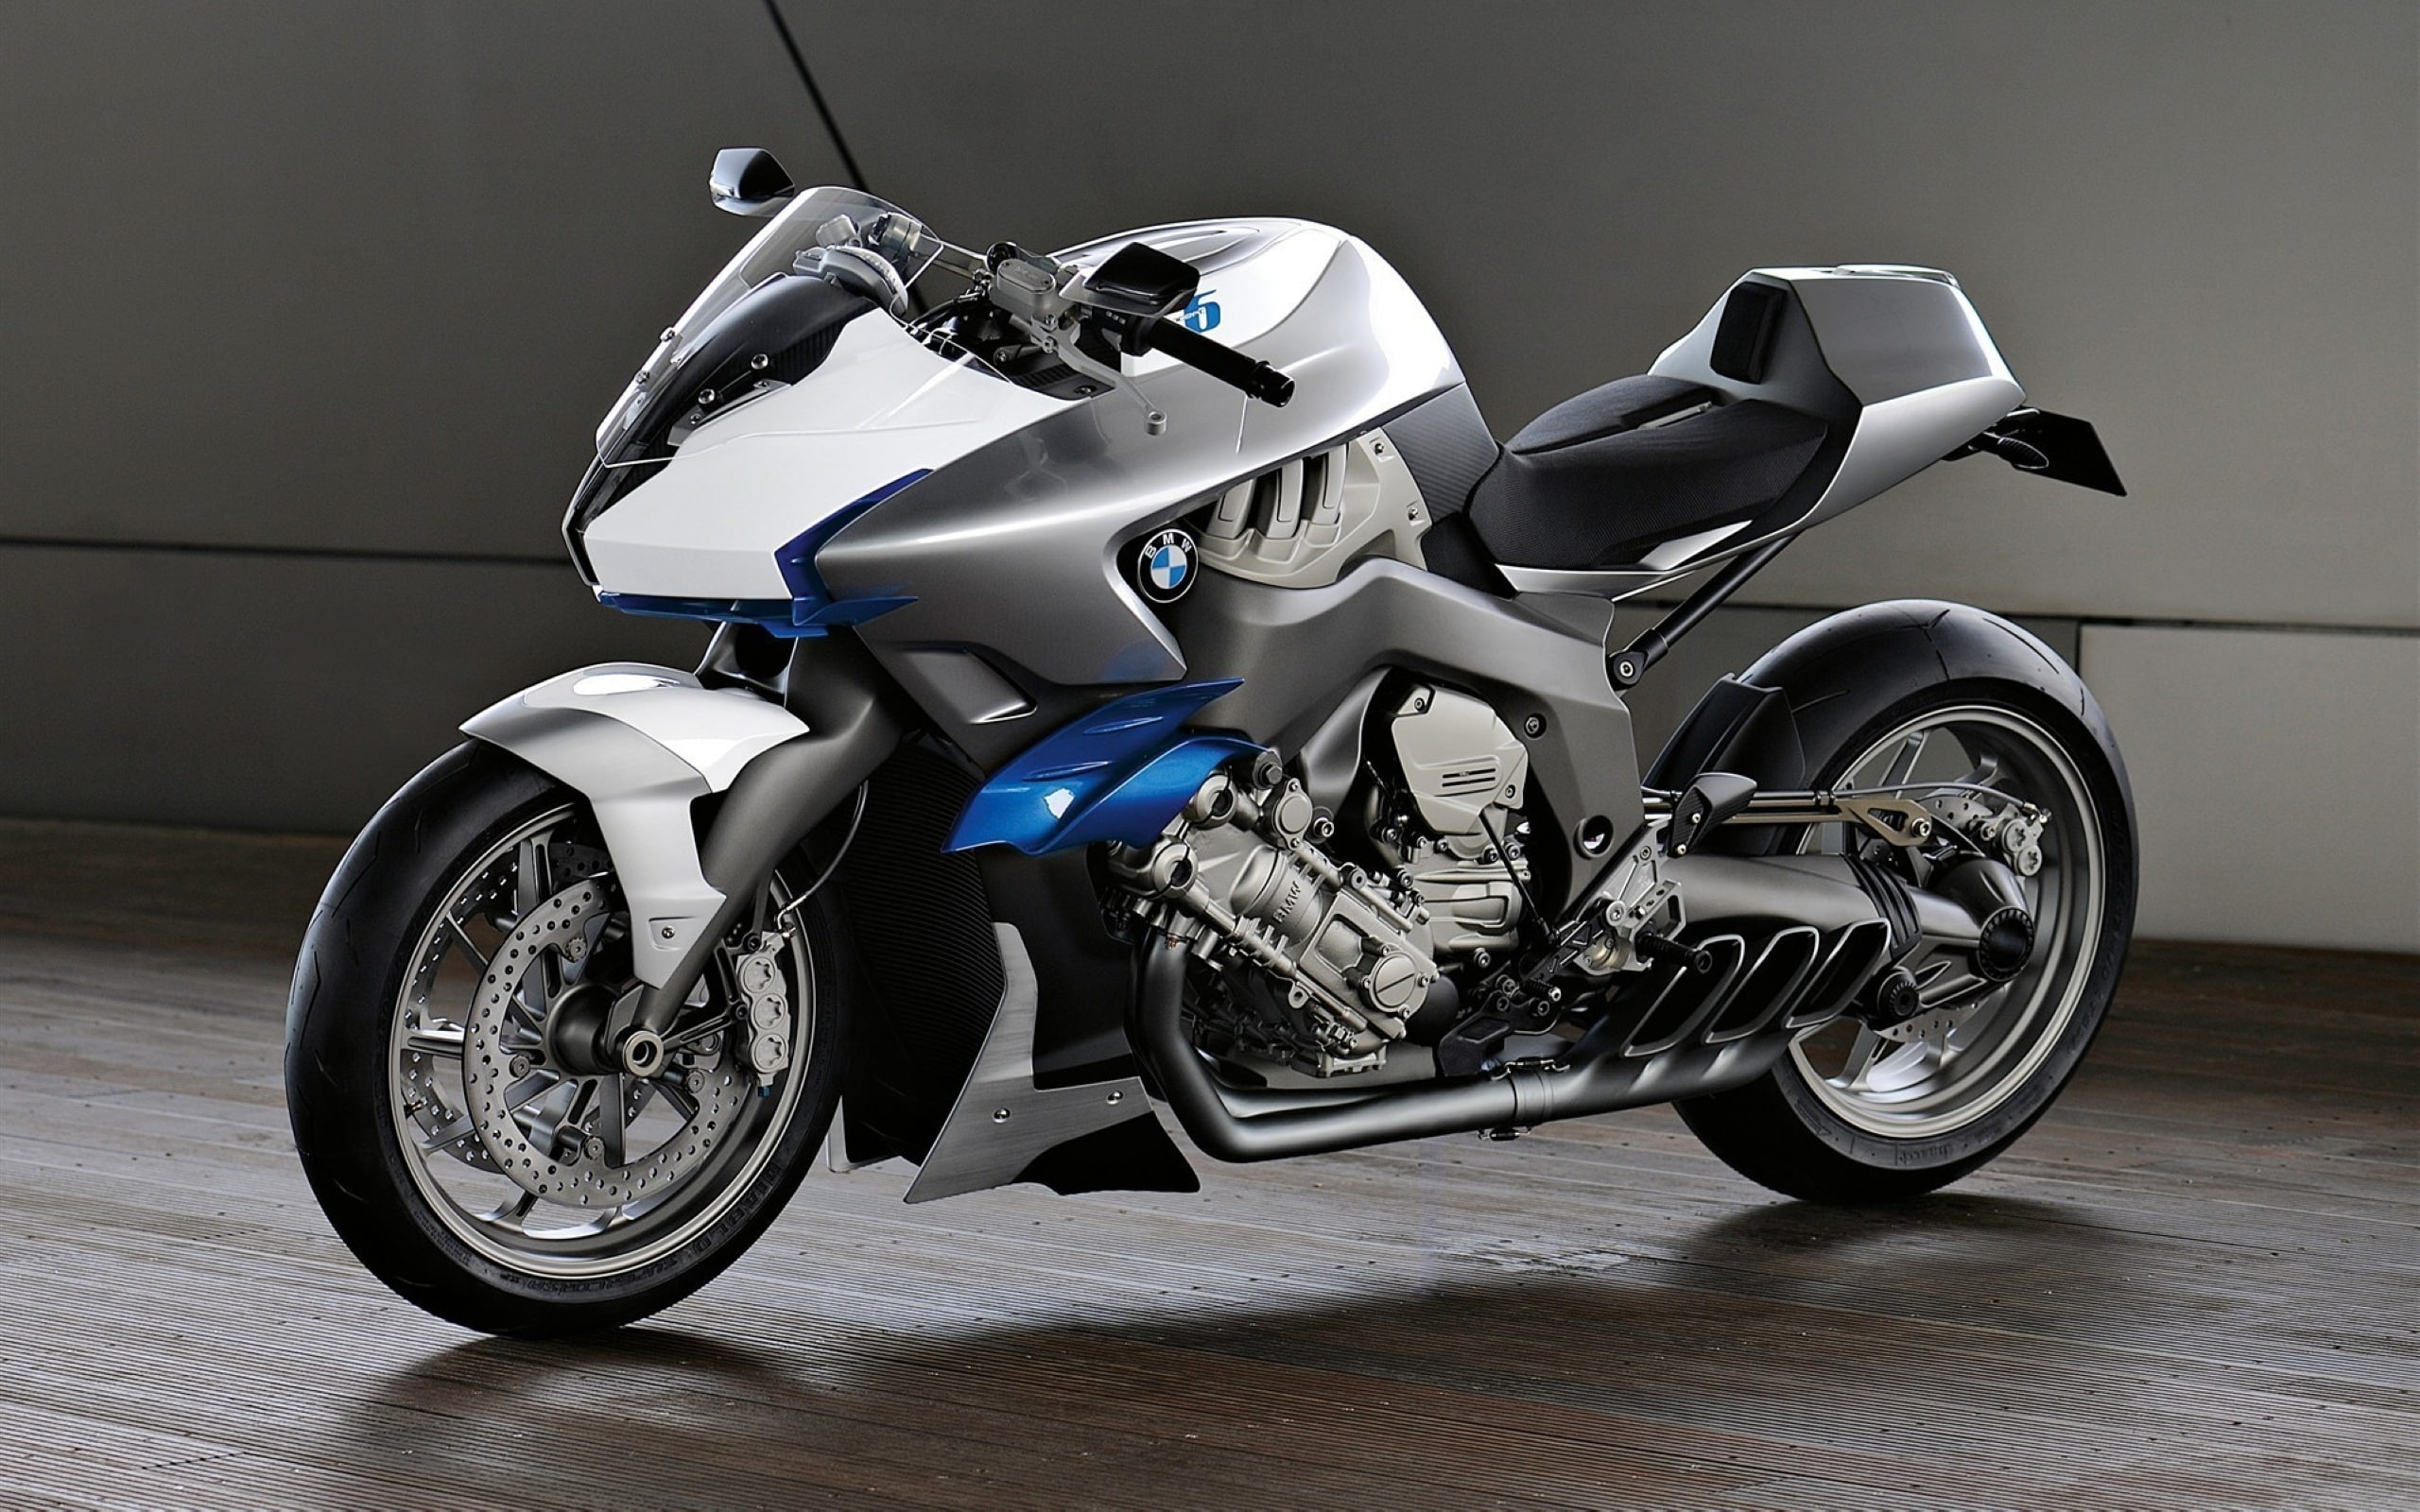 BMW Concept 6, Motorcycles, consept bike